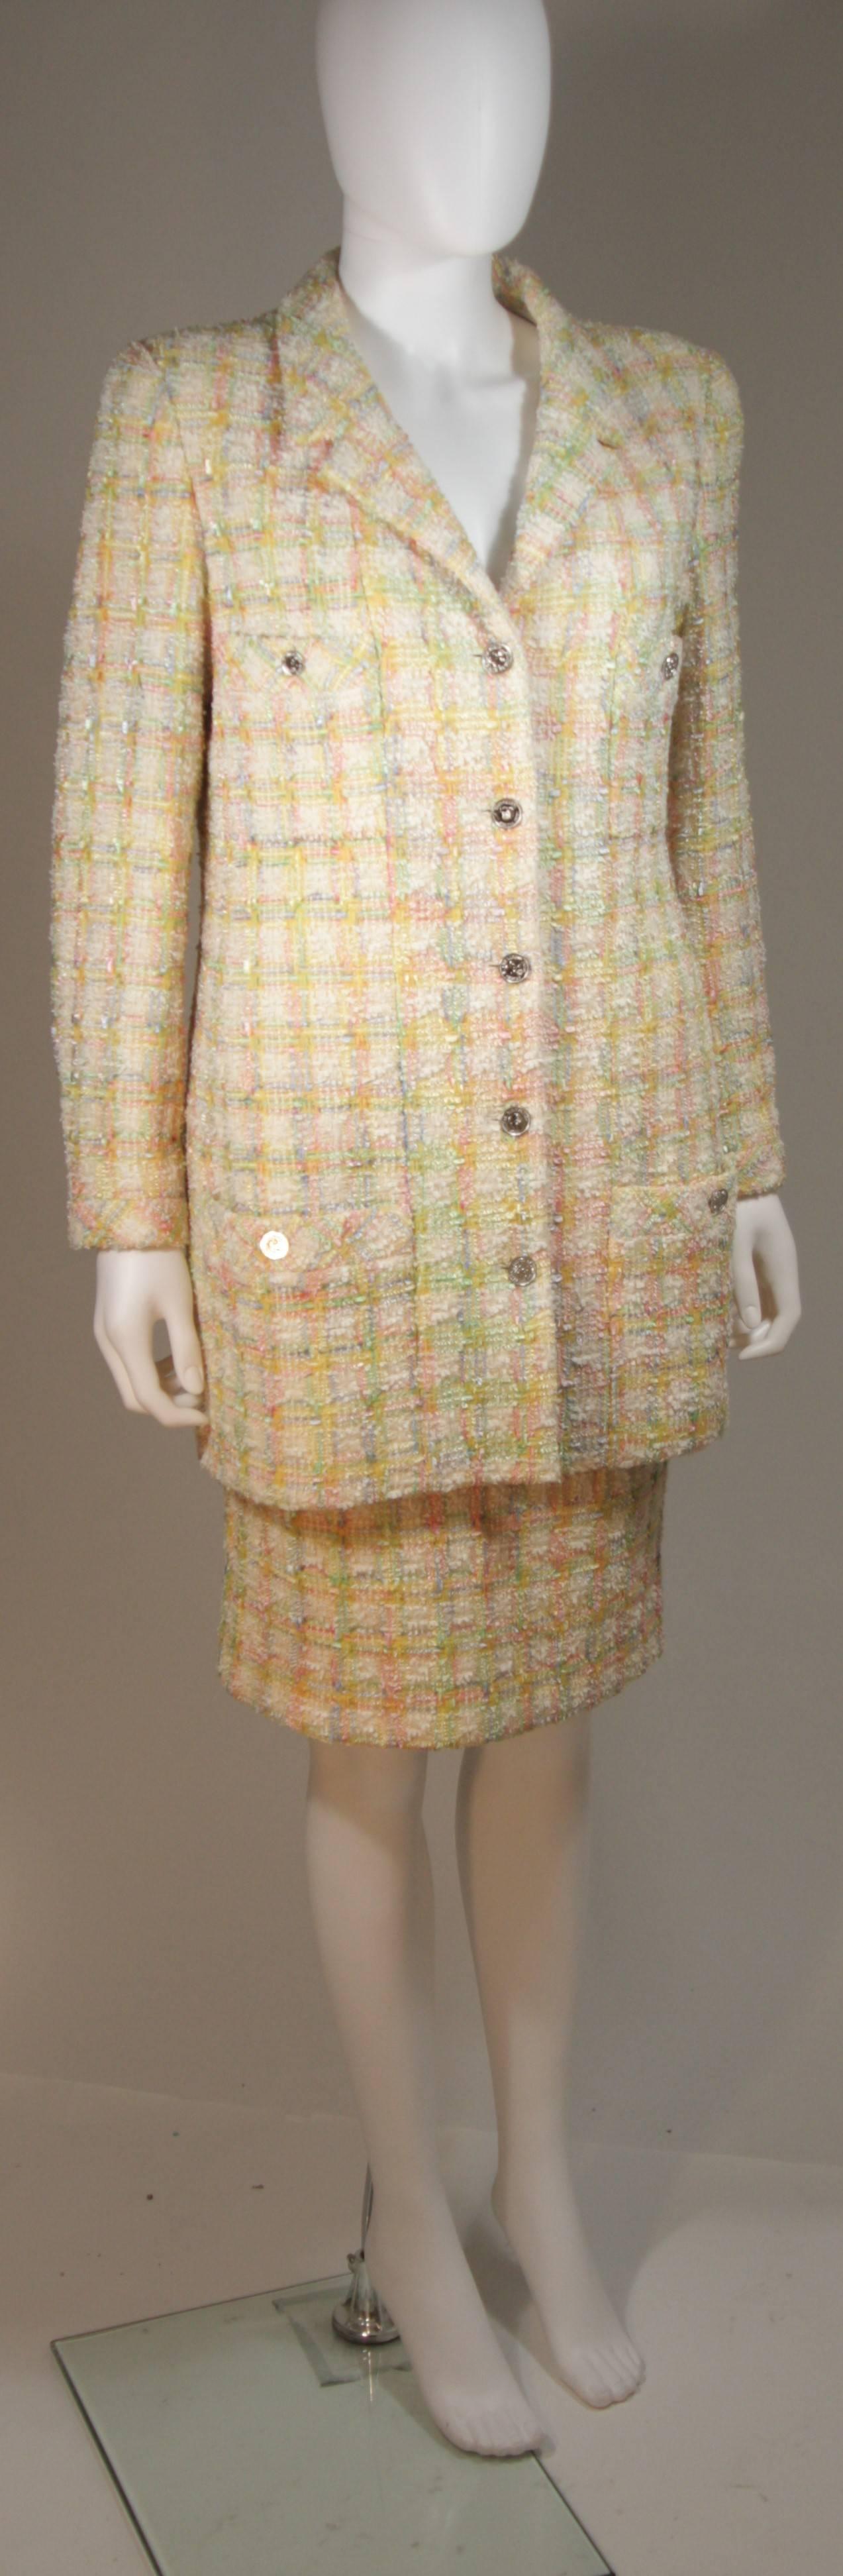 Women's CHANEL Pastel Cream Yellow and Pink Skirt Suit Size 42